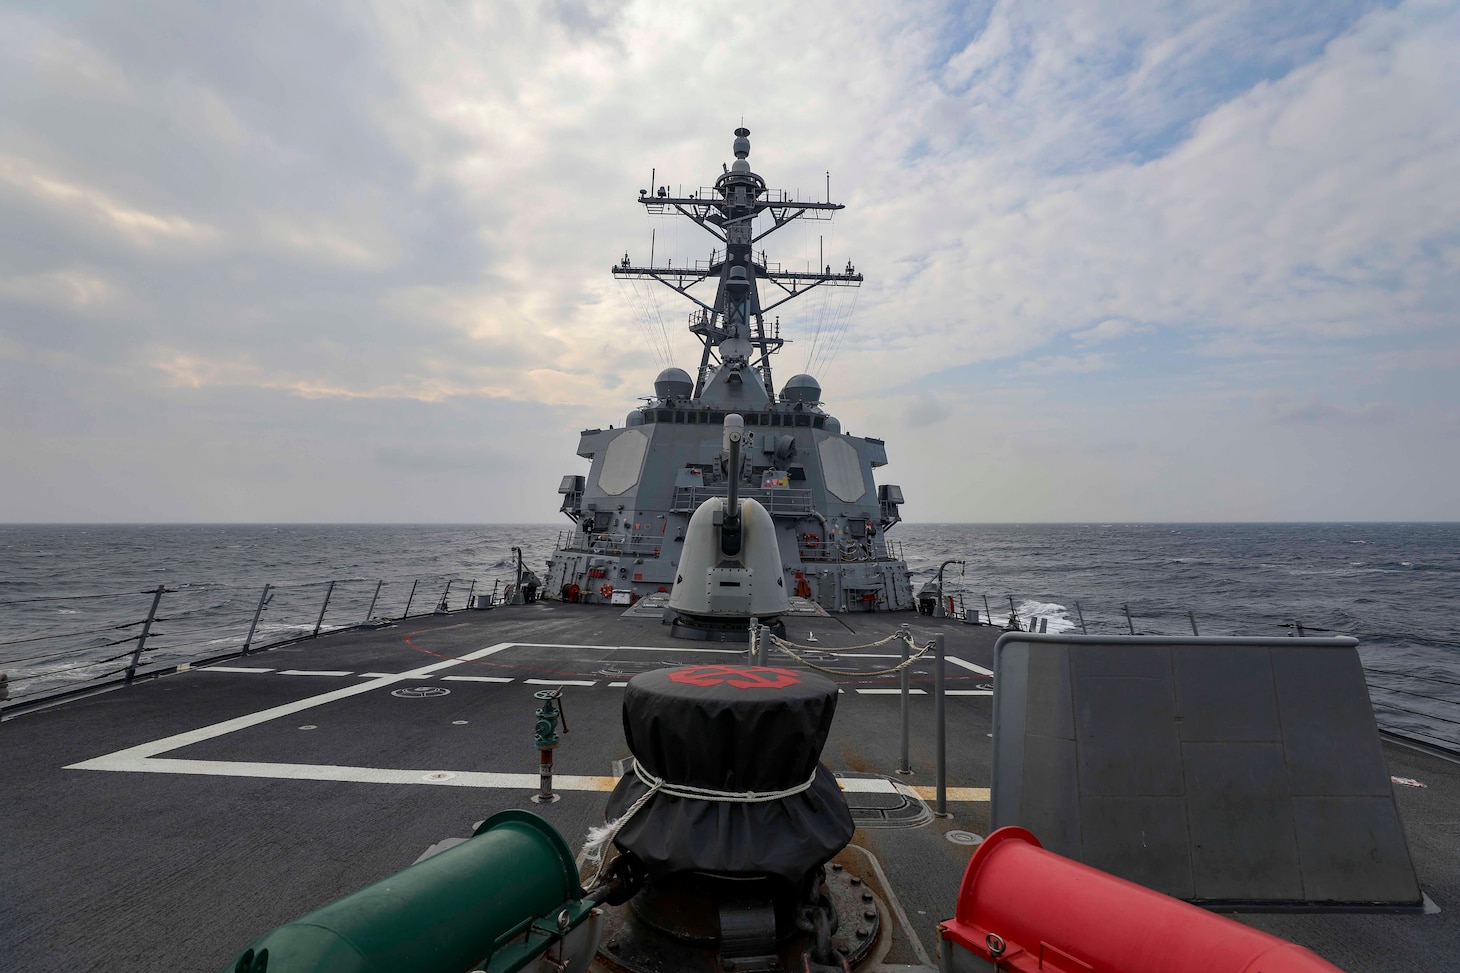 TAIWAN STRAIT (Sept. 20, 2022) The guided-missile destroyer USS Higgins (DDG 76) conducts a routine Taiwan Strait transit Sept. 20. Higgins is forward-deployed to the U.S. 7th Fleet area of operations in support of a free and open Indo-Pacific. (U.S. Navy photo by Mass Communication Specialist 1st Class Donavan K. Patubo)